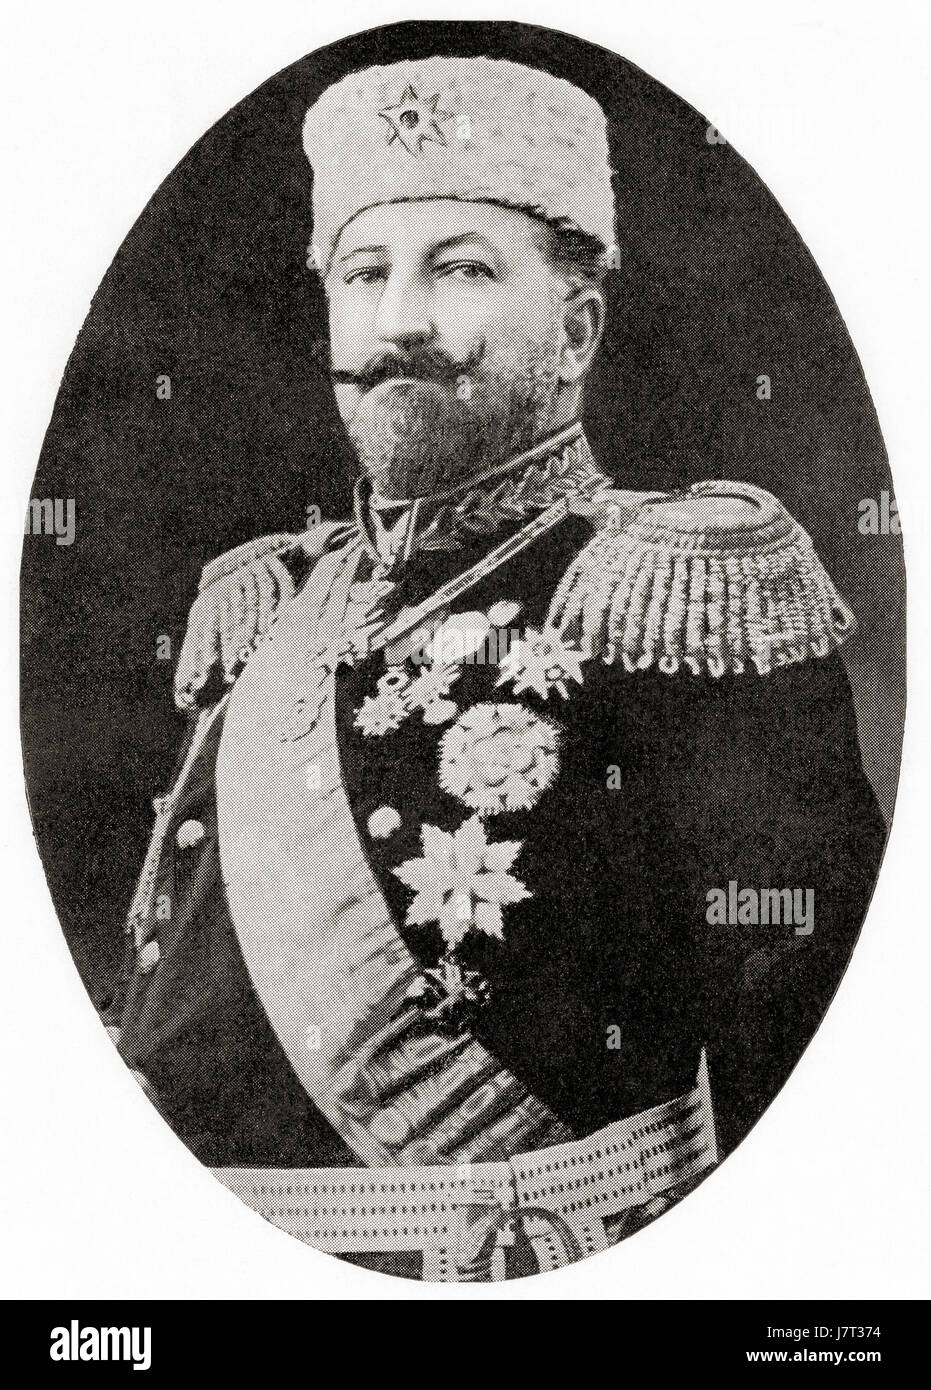 Ferdinand I, 1861 – 1948.  Prince Regent then Tsar of Bulgaria in 1908 on the country's independence from the Ottoman Empire.  He was also an author, botanist, entomologist and philatelist.  From Hutchinson's History of the Nations, published 1915. Stock Photo